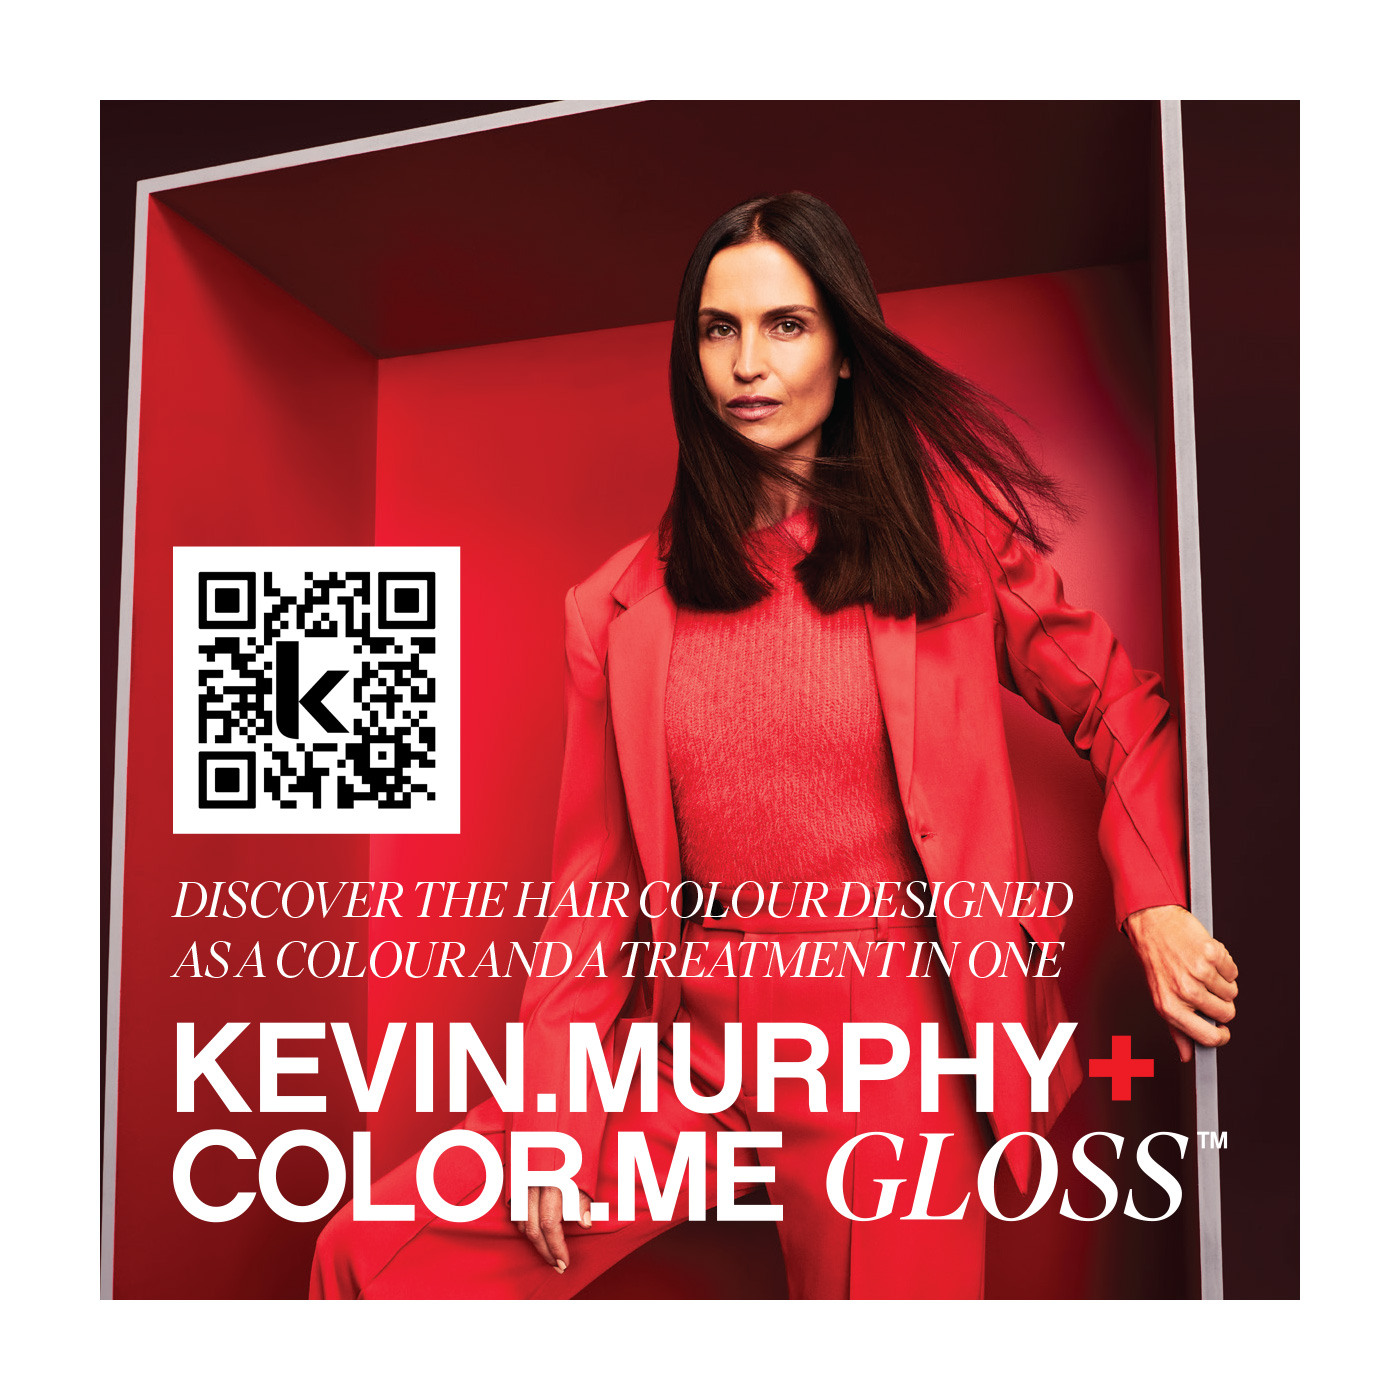 KEVIN.MURPHY COLOR.ME GLOSS Mirror Cling